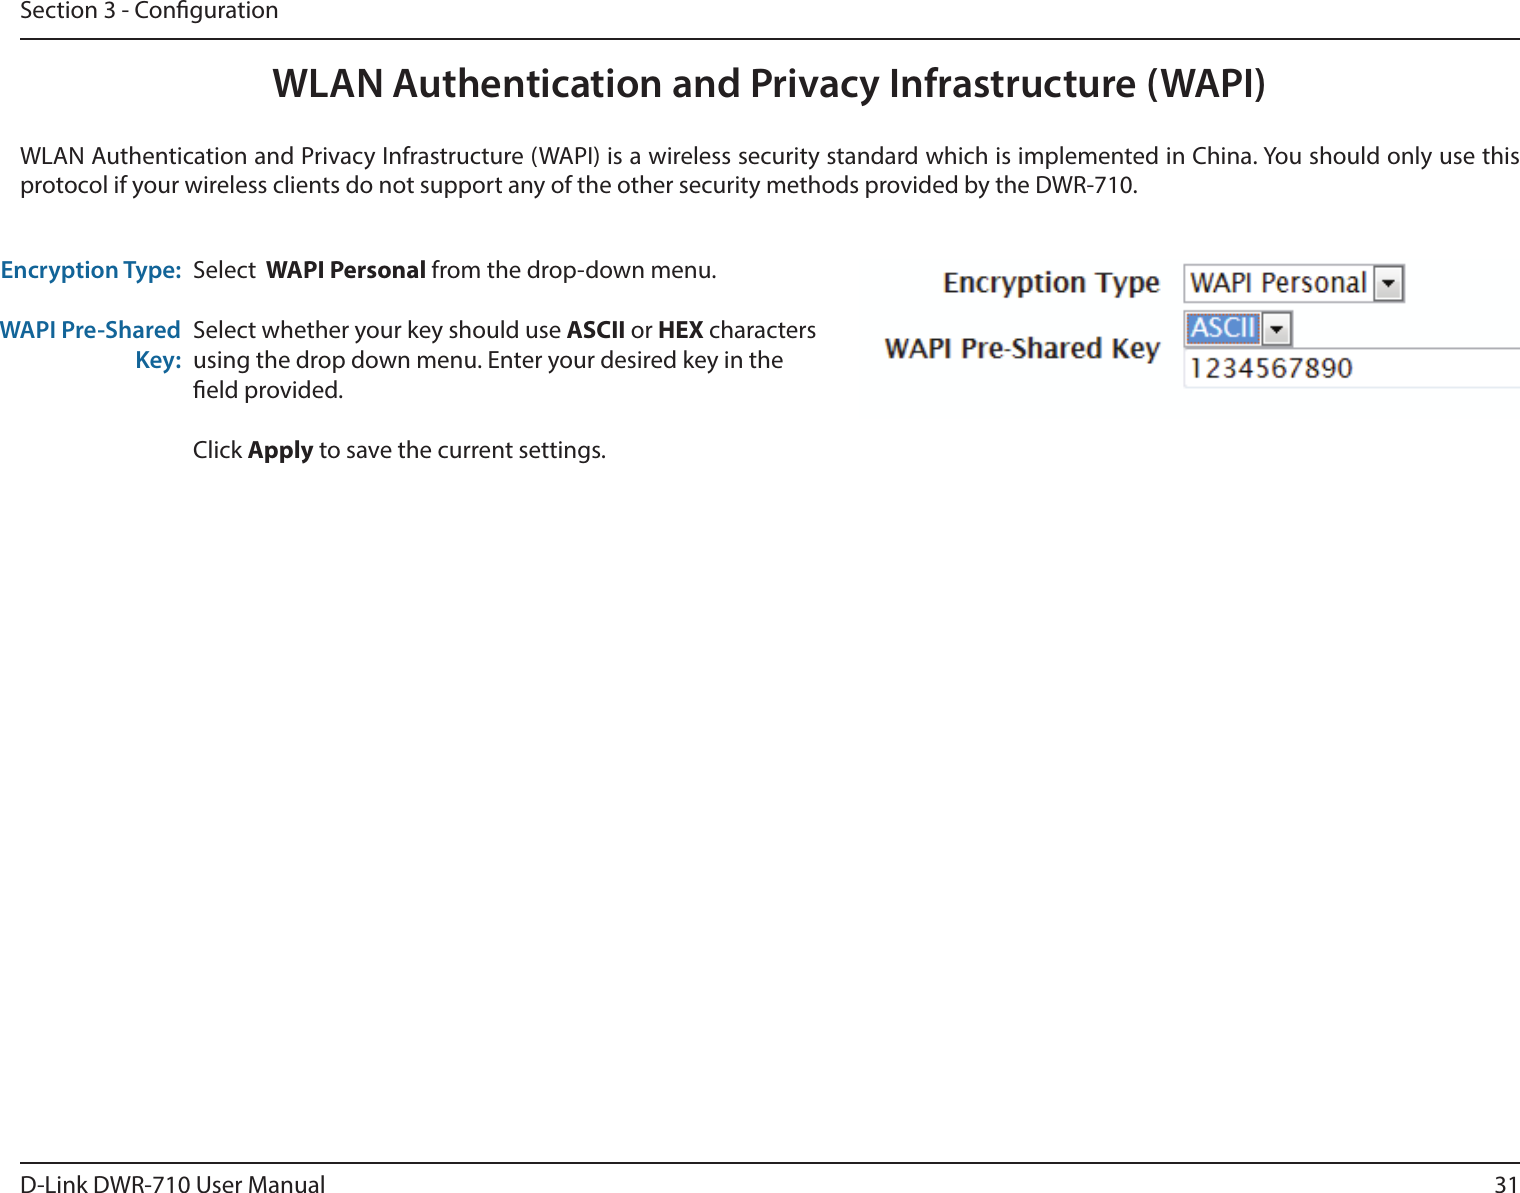 31D-Link DWR-710 User ManualSection 3 - CongurationWLAN Authentication and Privacy Infrastructure (WAPI)WLAN Authentication and Privacy Infrastructure (WAPI) is a wireless security standard which is implemented in China. You should only use this protocol if your wireless clients do not support any of the other security methods provided by the DWR-710.Encryption Type:WAPI Pre-Shared Key:Select  WAPI Personal from the drop-down menu. Select whether your key should use ASCII or HEX characters using the drop down menu. Enter your desired key in the eld provided. Click Apply to save the current settings. 